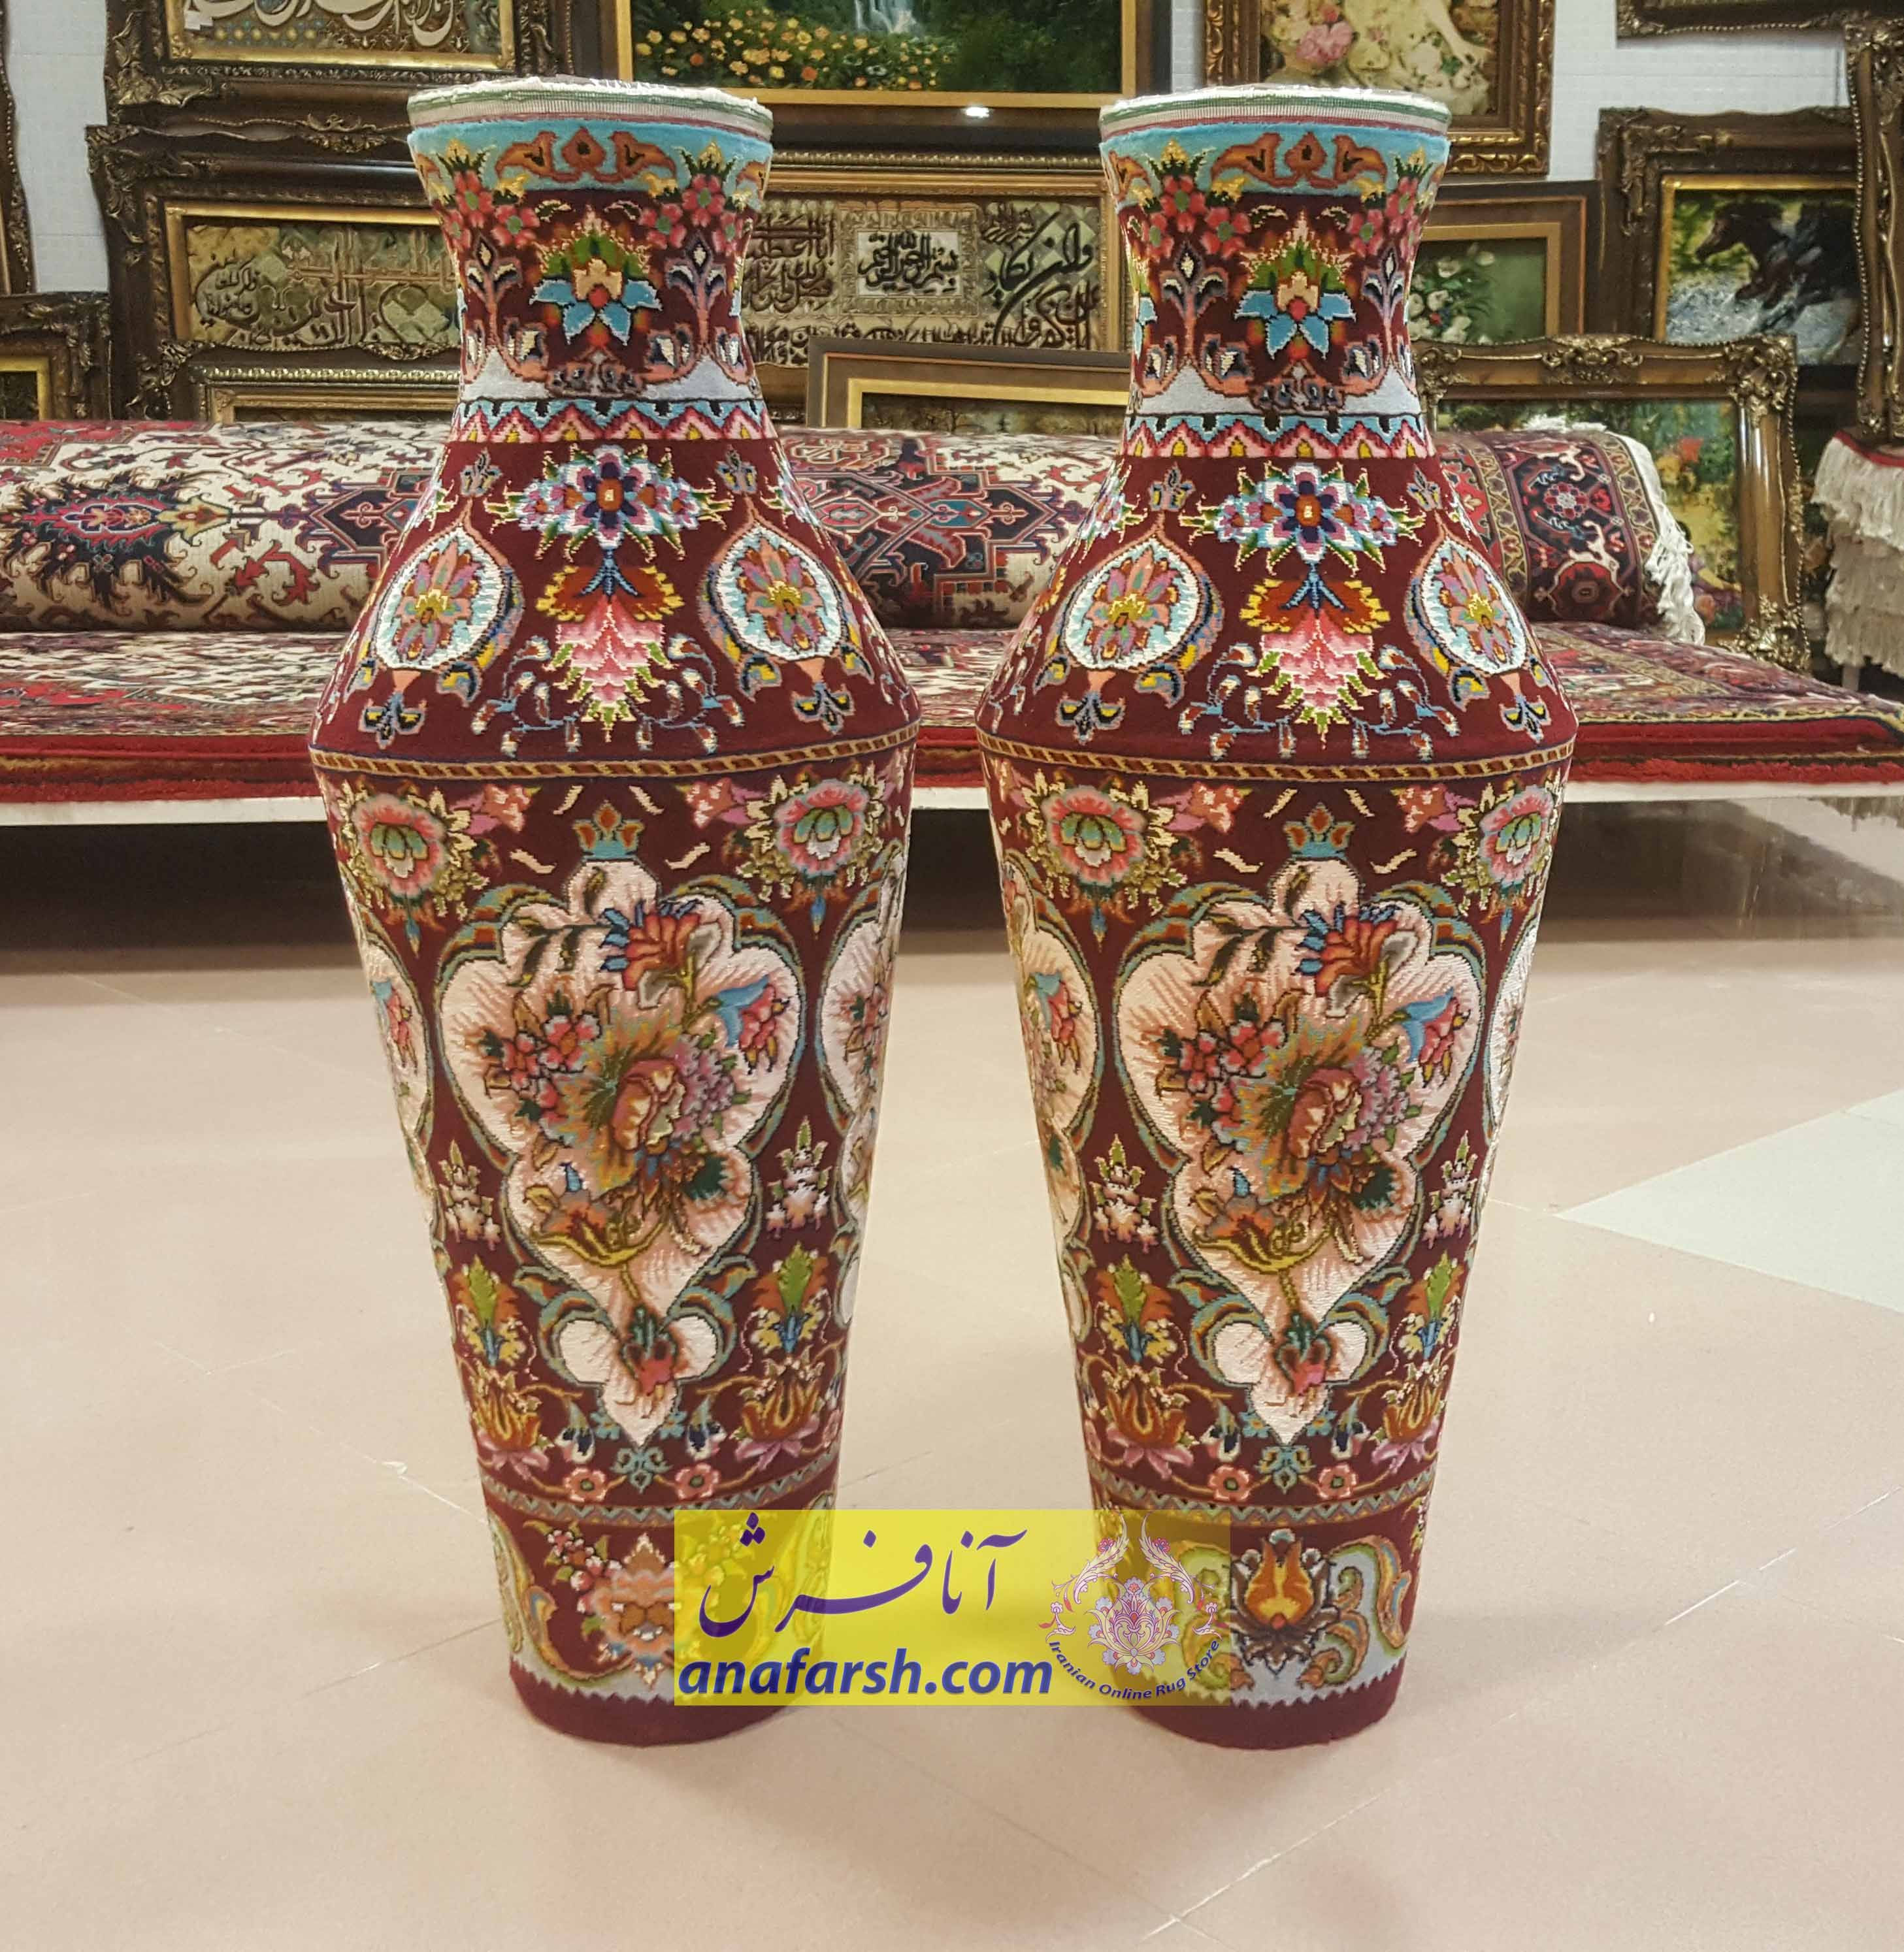 10 Lovely Moorcroft Sunflower Vase 2024 free download moorcroft sunflower vase of pin by ana farsh on uuc288oc2b2uc287 uc288 uc2afuc284oc2afoc2a7uc286 uc281oc2b1o pinterest art and persian for persian kimono persian people persian c